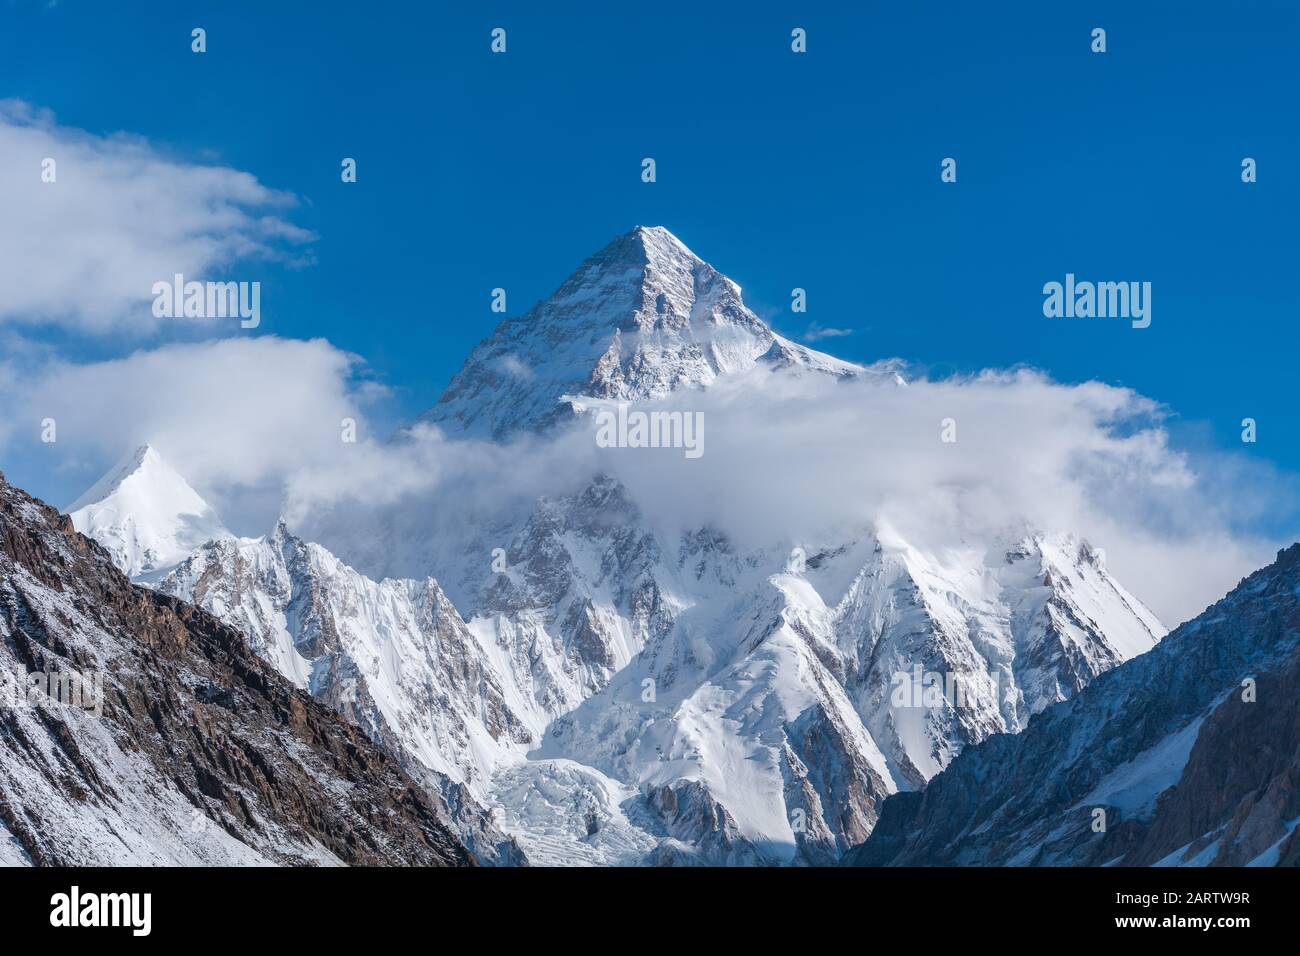 Close up view of K2, the second highest mountain in the world with Angel peak and Nera peak on the left side from Concordia, Pakistan Stock Photo